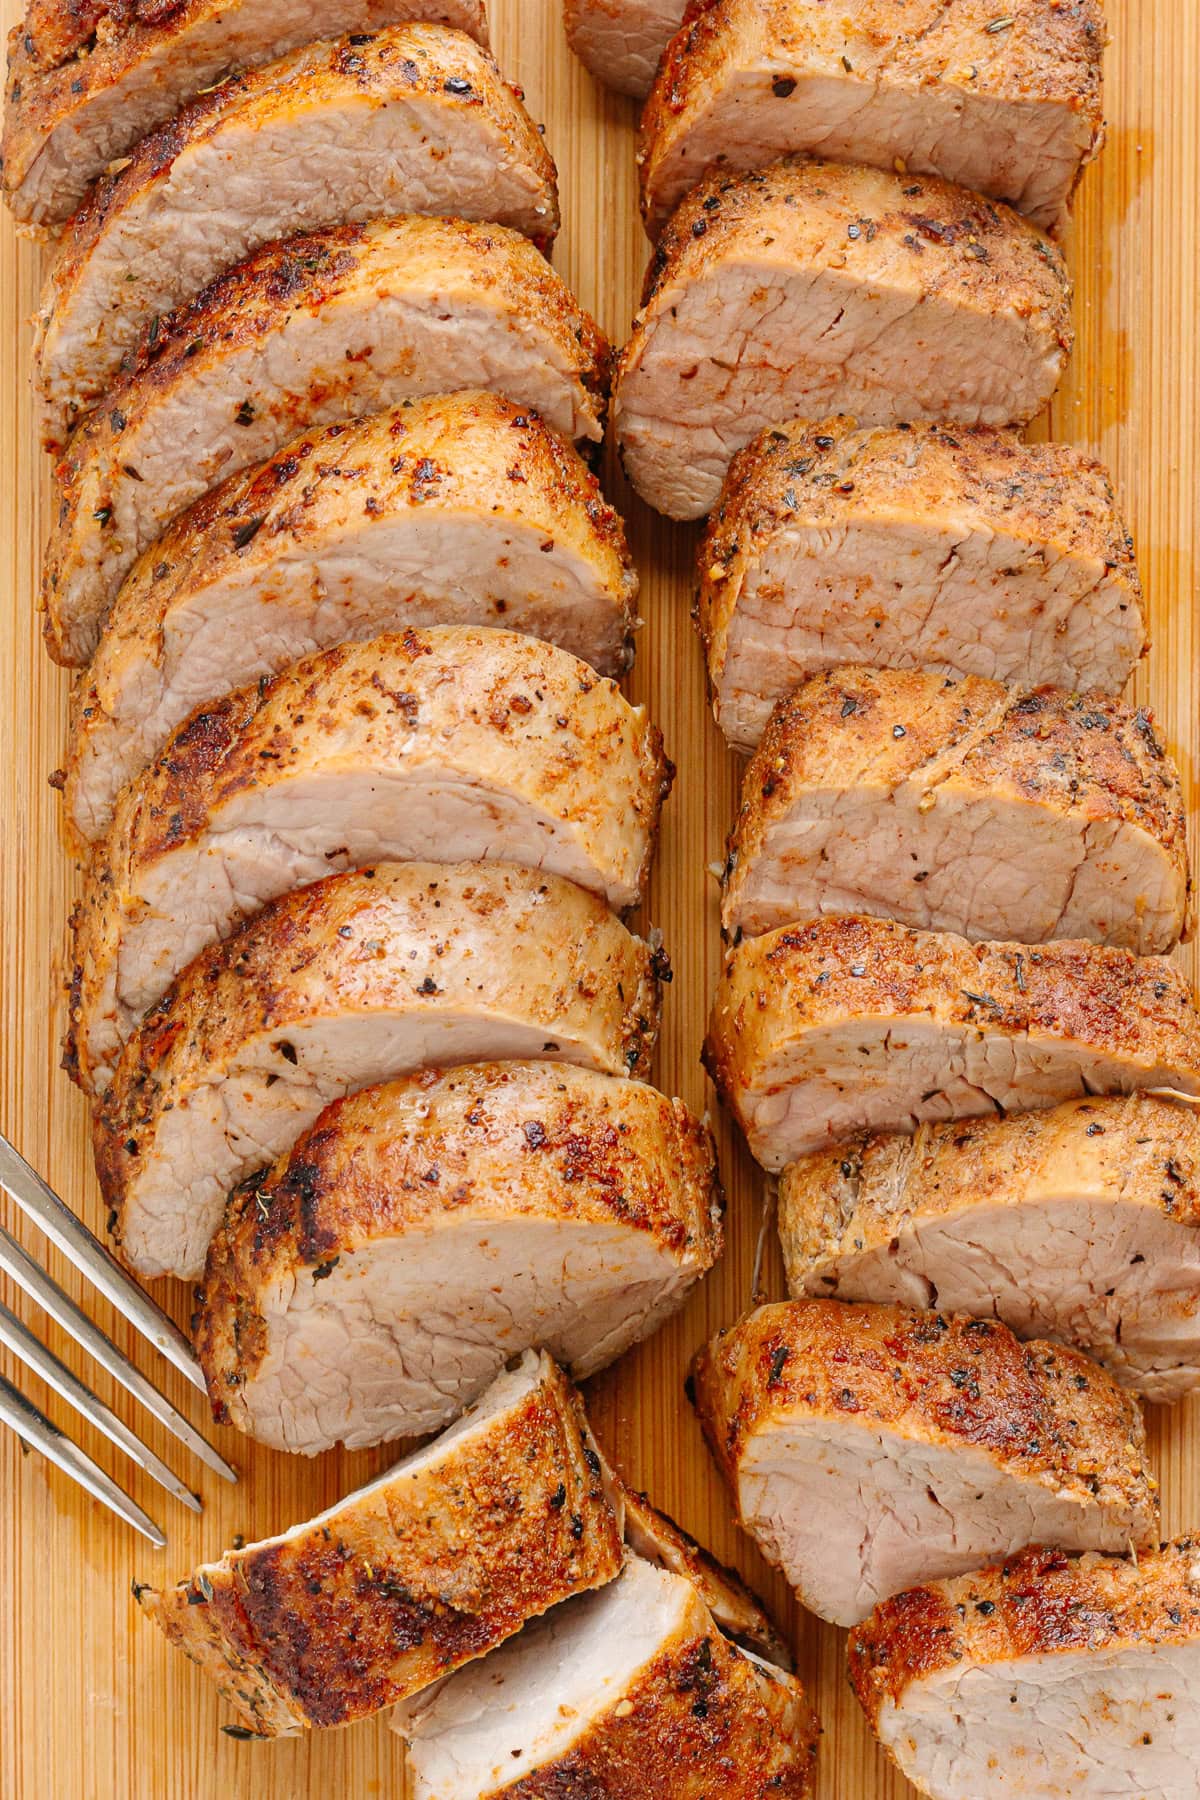 Sliced up cooked pork tenderloin on a wood board with a fork.